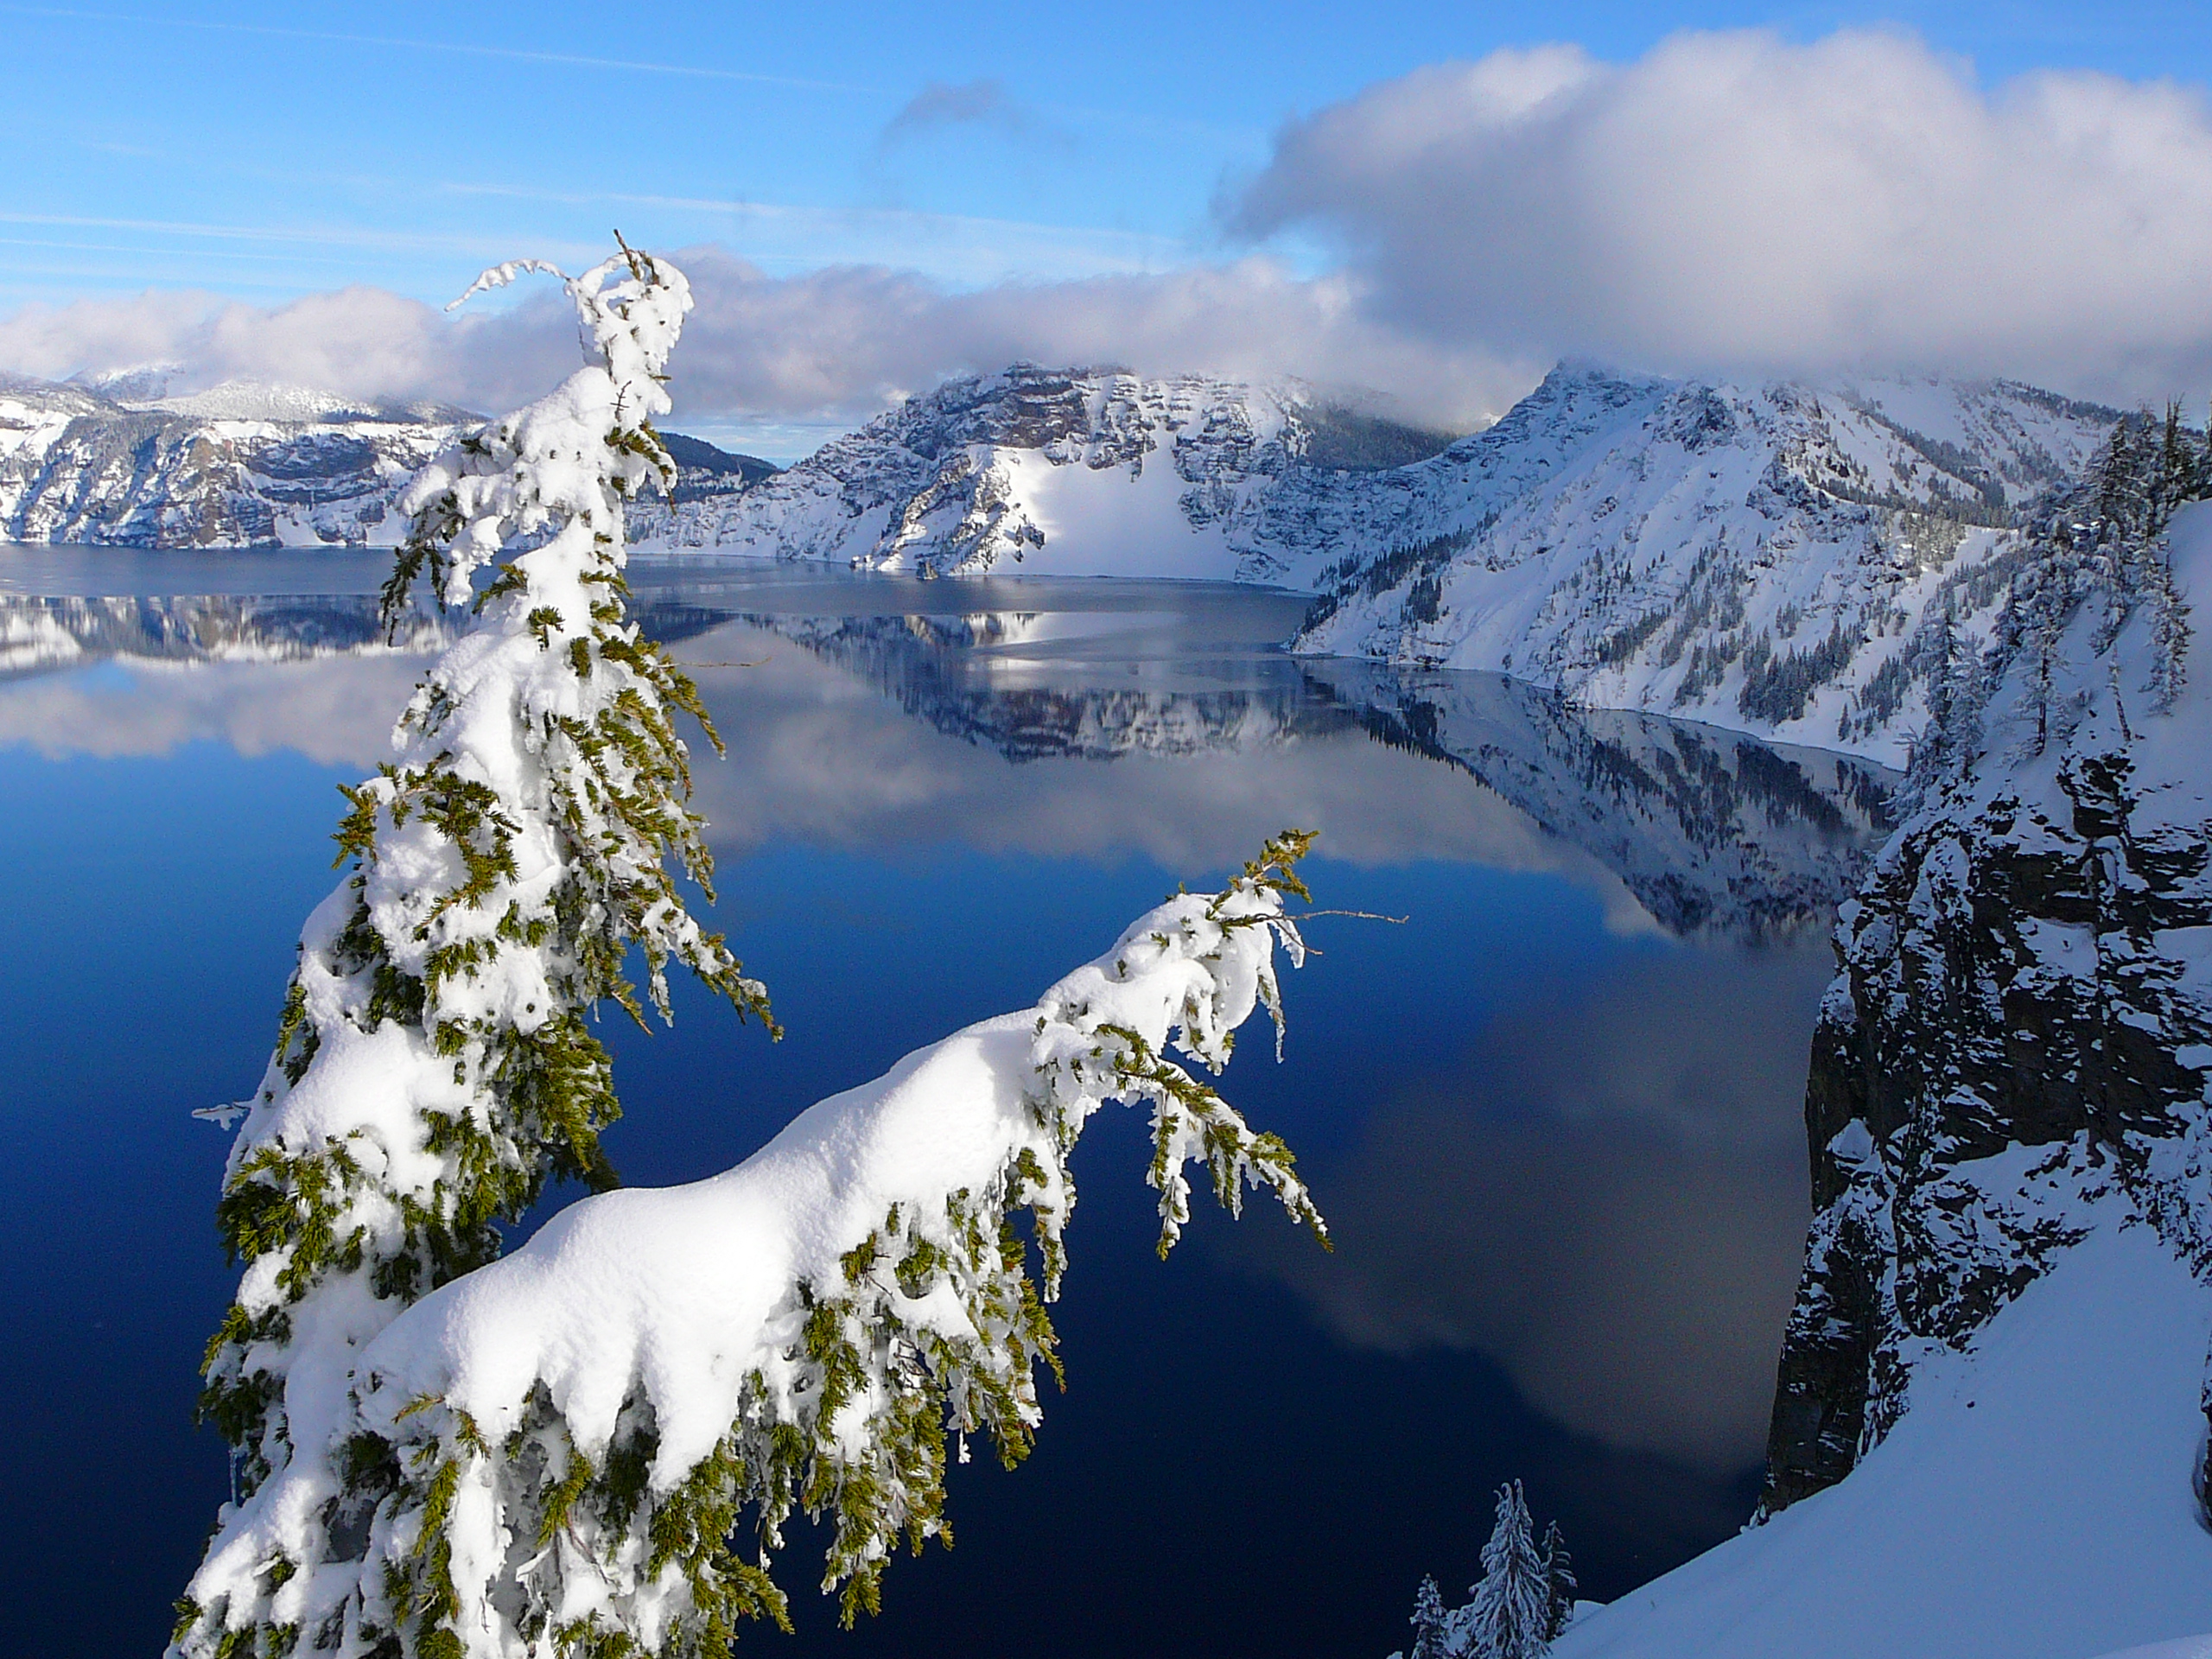 A view of Crater Lake in the winter